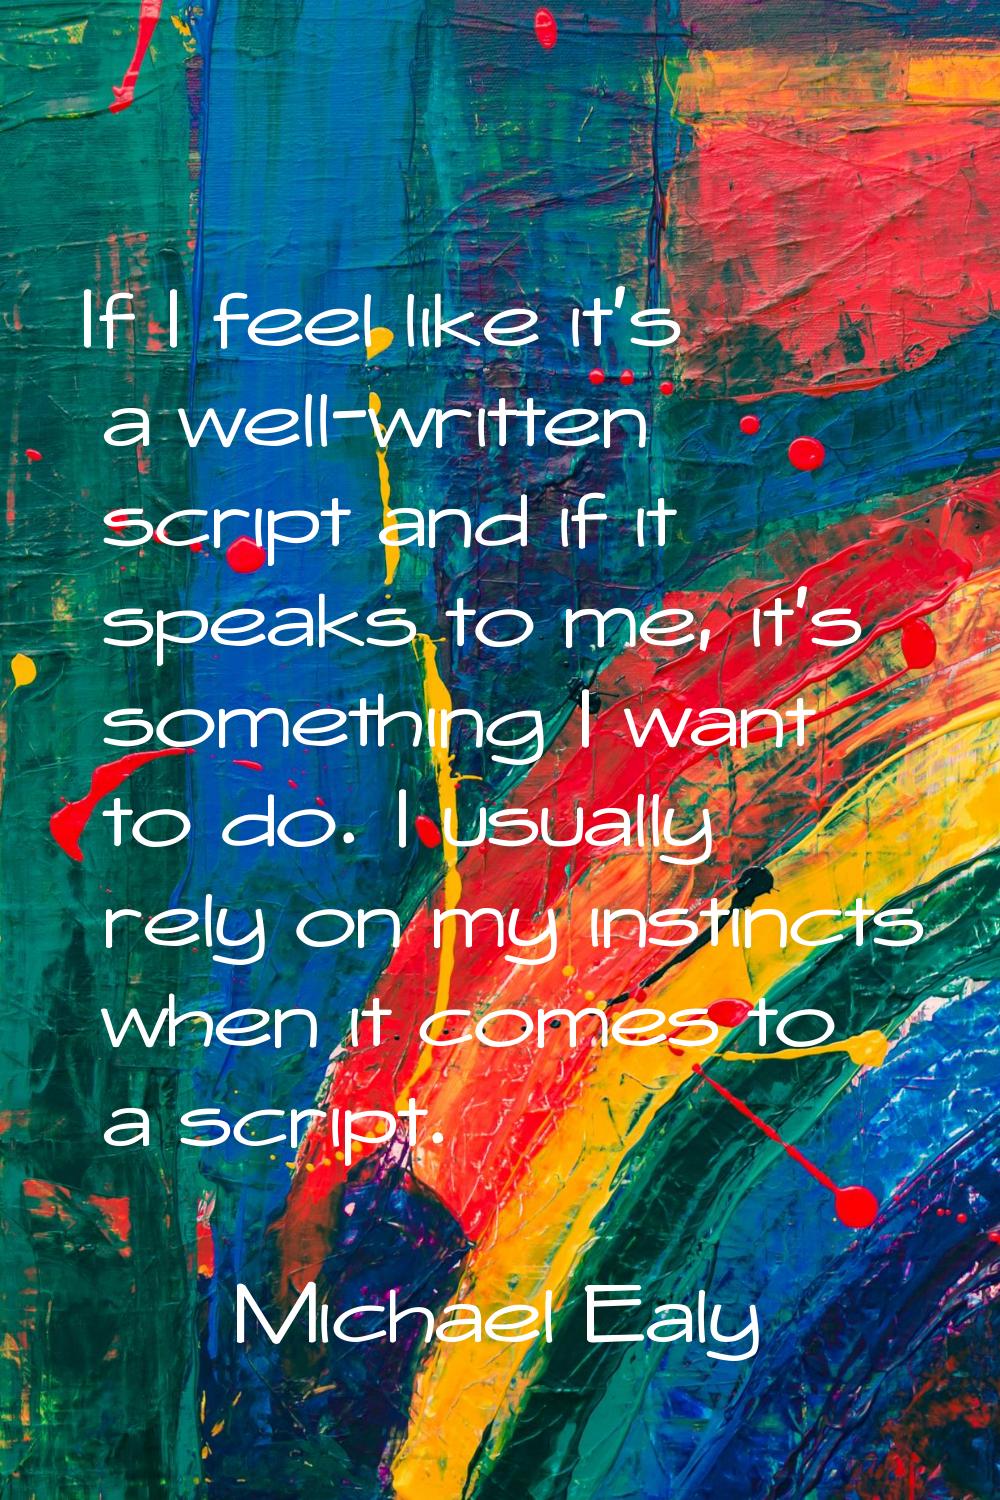 If I feel like it's a well-written script and if it speaks to me, it's something I want to do. I us